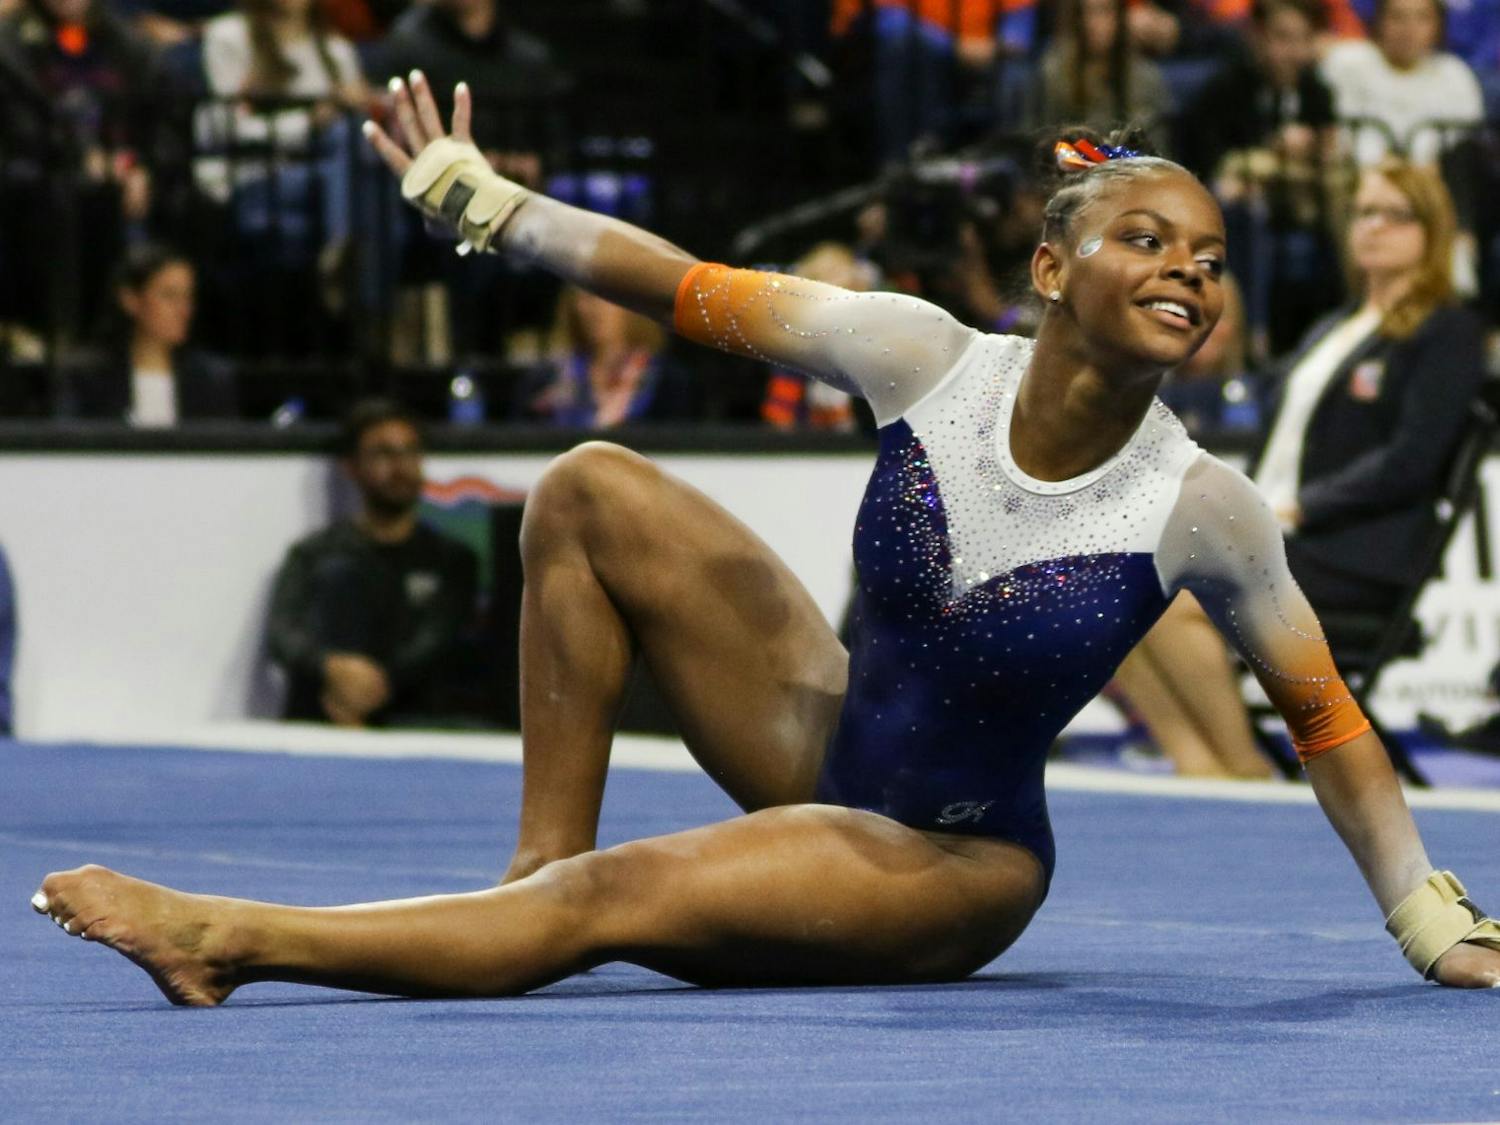 UF gymnast Trinity Thomas earned SEC Gymnast of the Week for her performance against Kentucky. She scored a 9.975 on the bars against the Wildcats.
&nbsp;